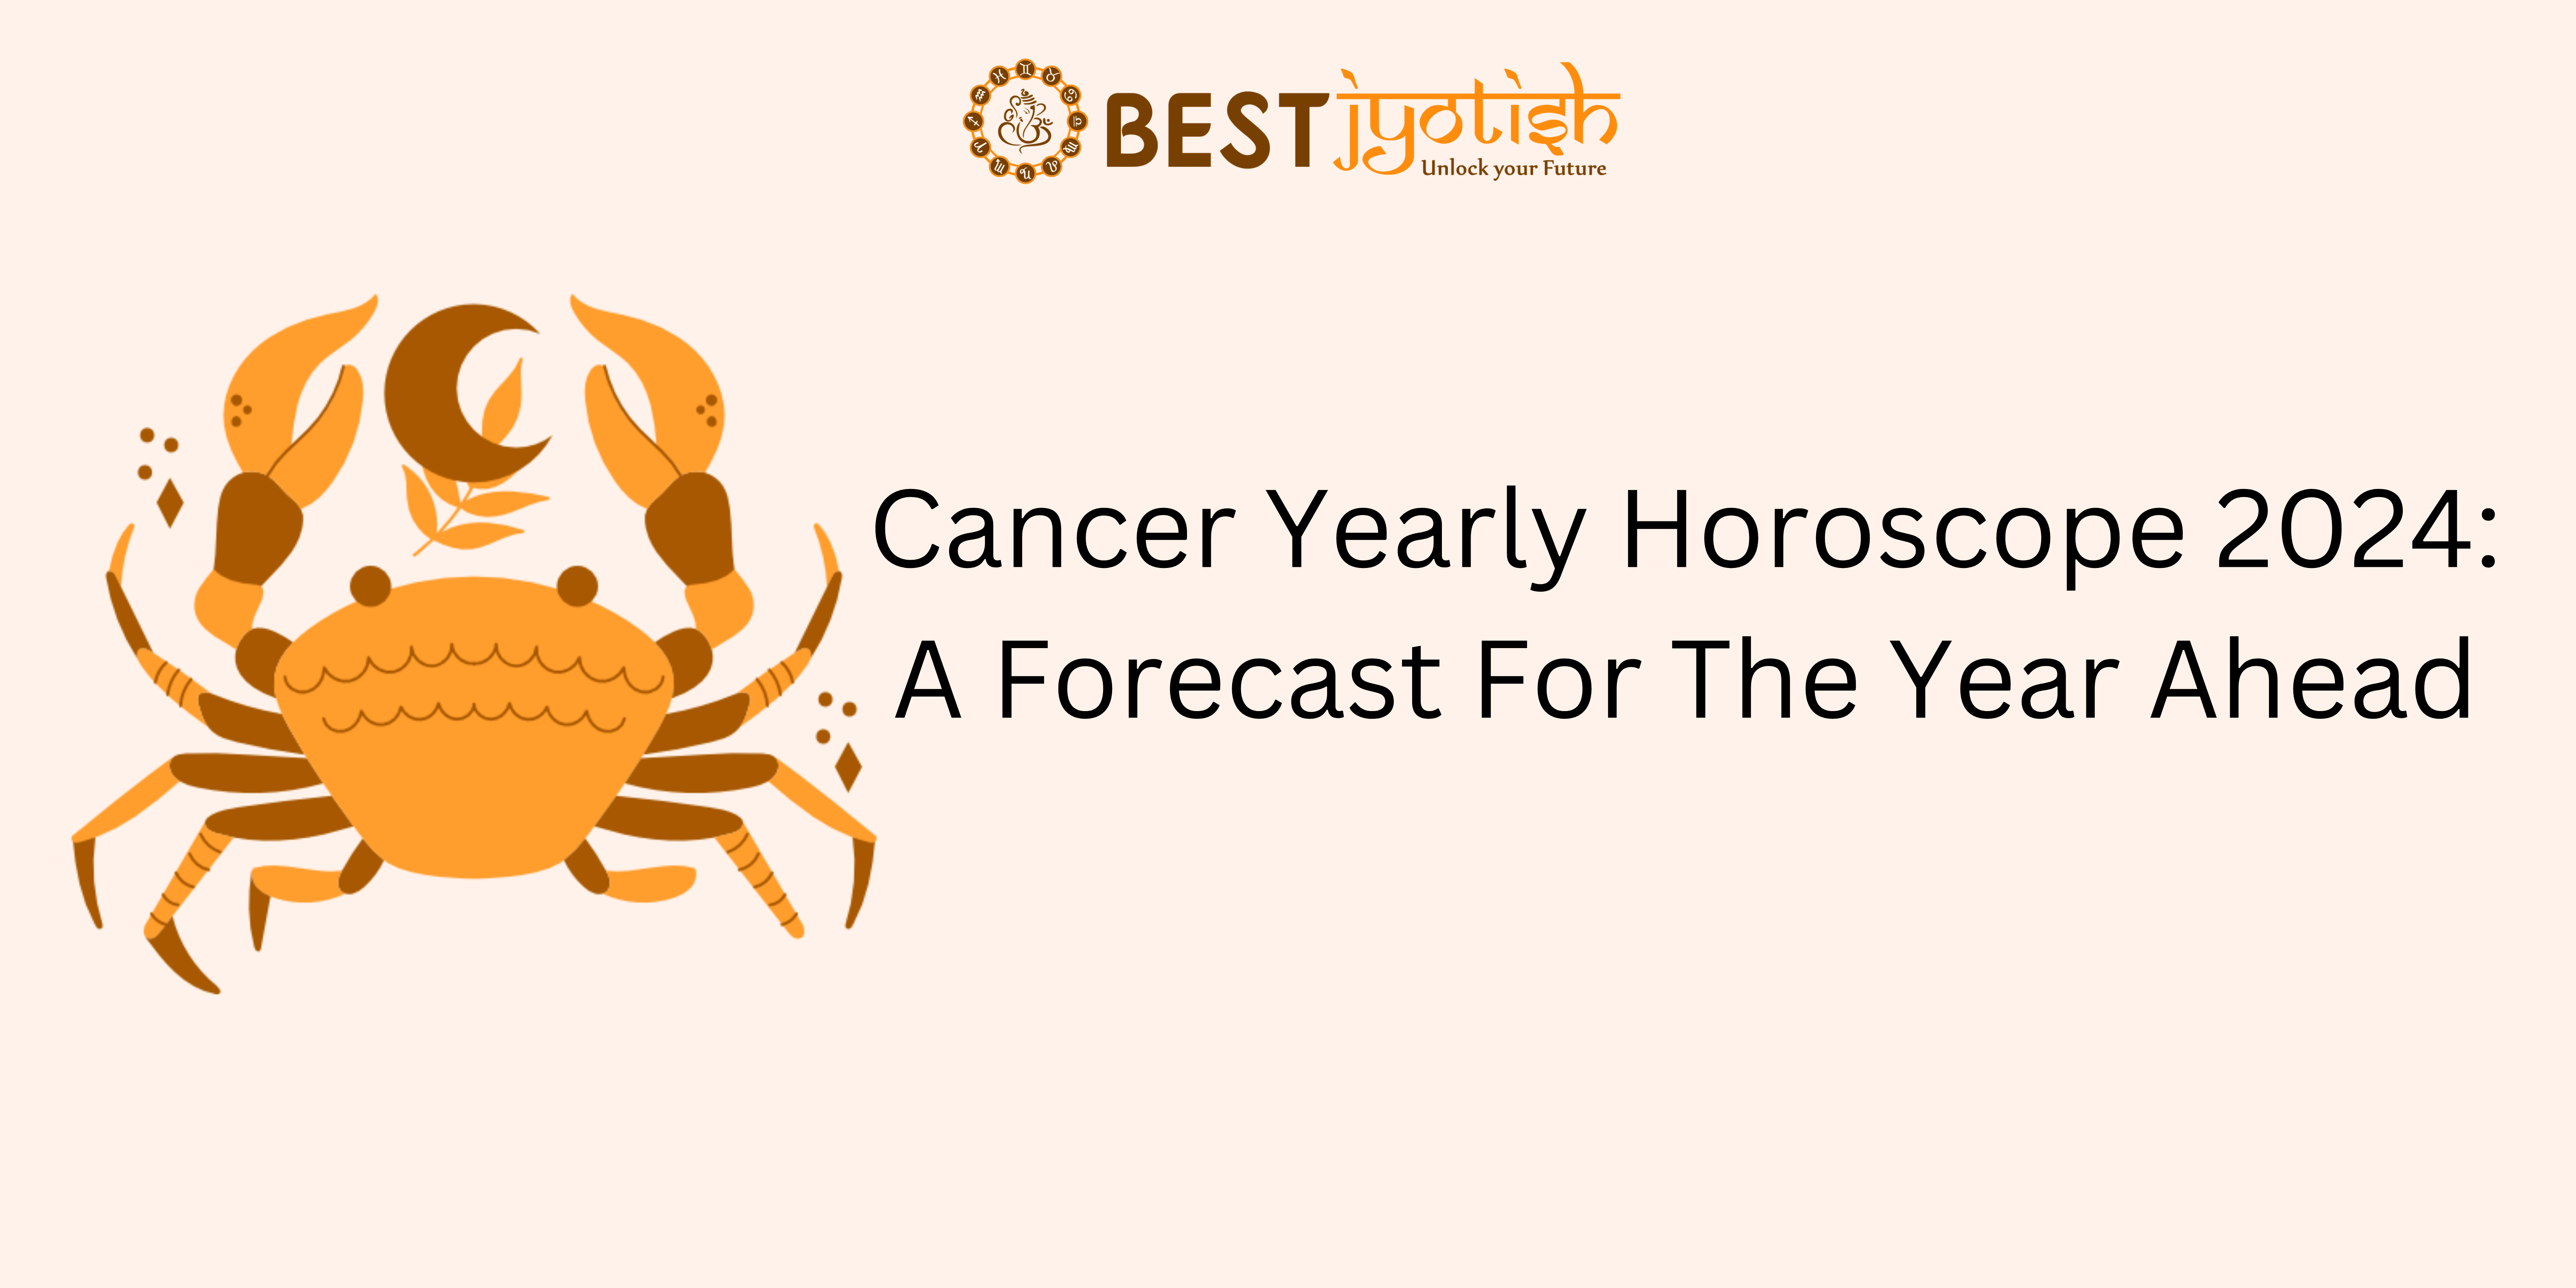 Cancer Yearly Horoscope 2024: Know What Upcoming Year Brings For You